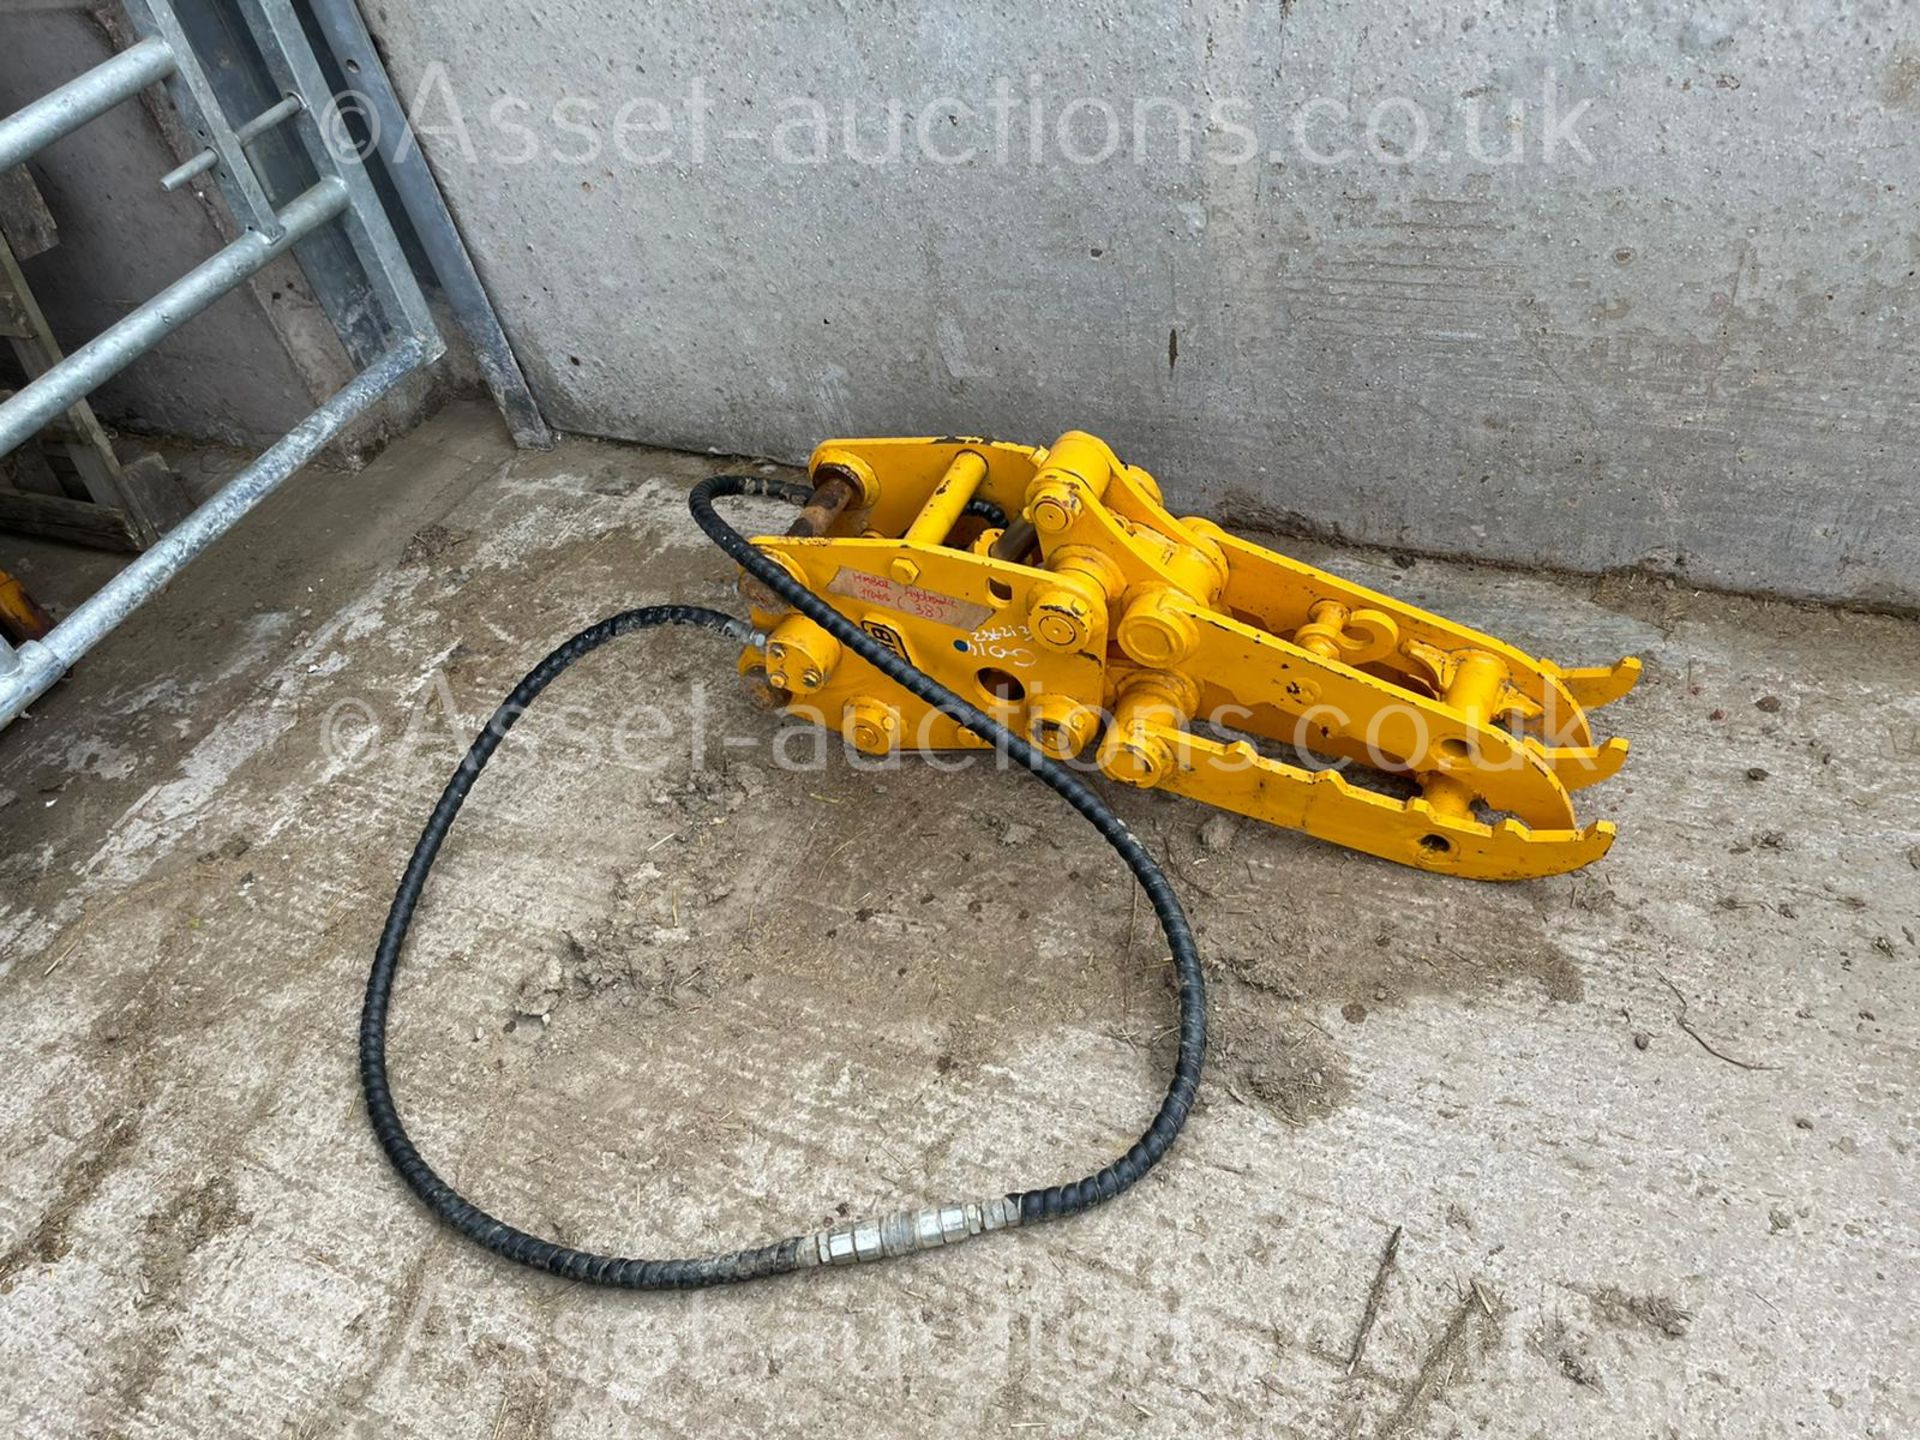 NEW AND UNUSED FINGER GRAB, HYDRAULIC DRIVEN, 35MM PINS *PLUS VAT* - Image 3 of 12